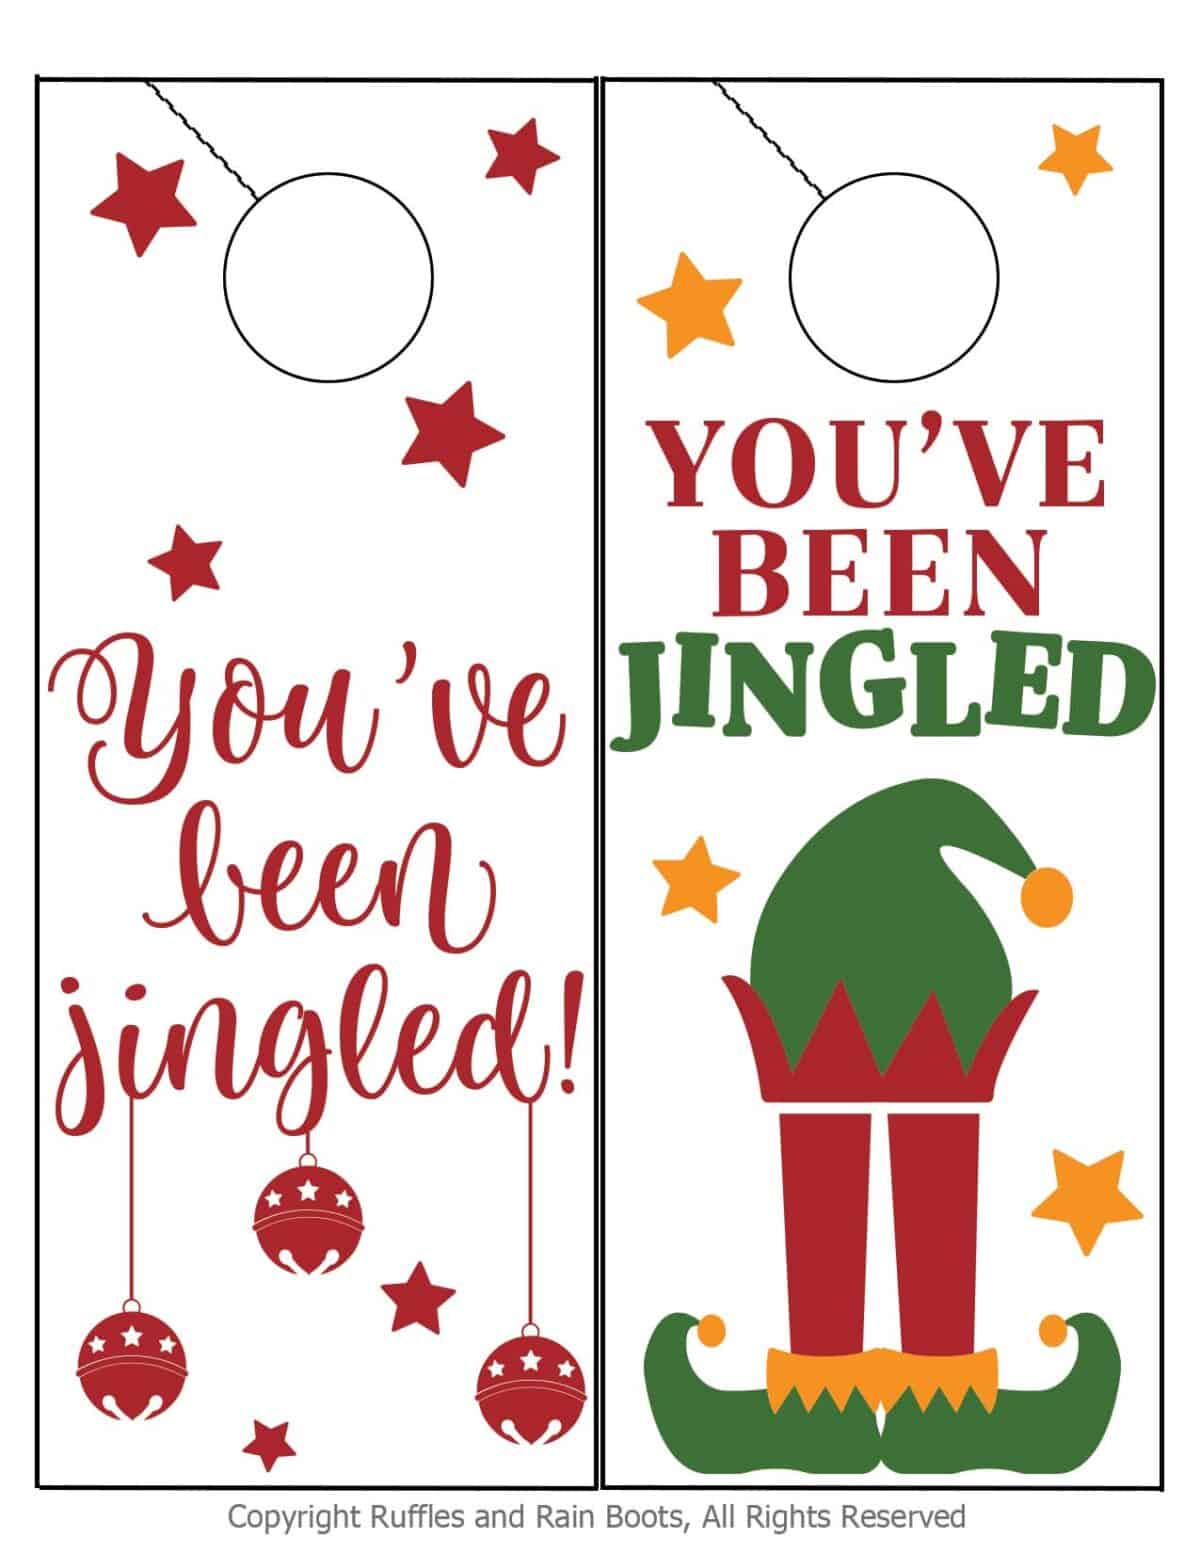 You've been jingled Christmas printable door tag for easy holiday gifts in two styles.